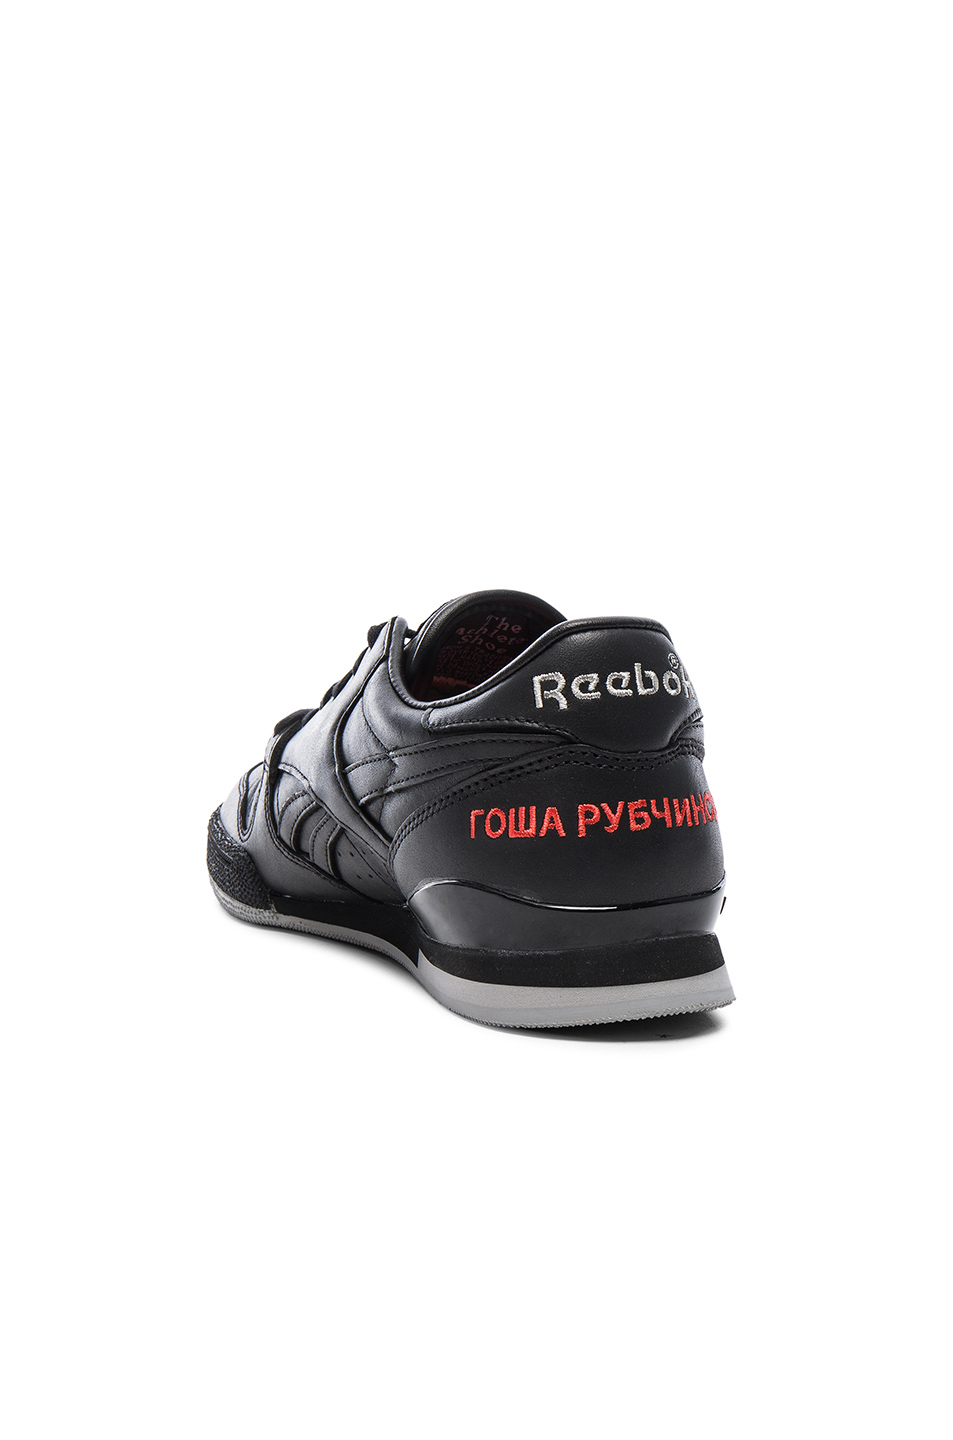 Gosha Rubchinskiy X Reebok Classic Embroidered Leather Sneakers in Black |  Lyst